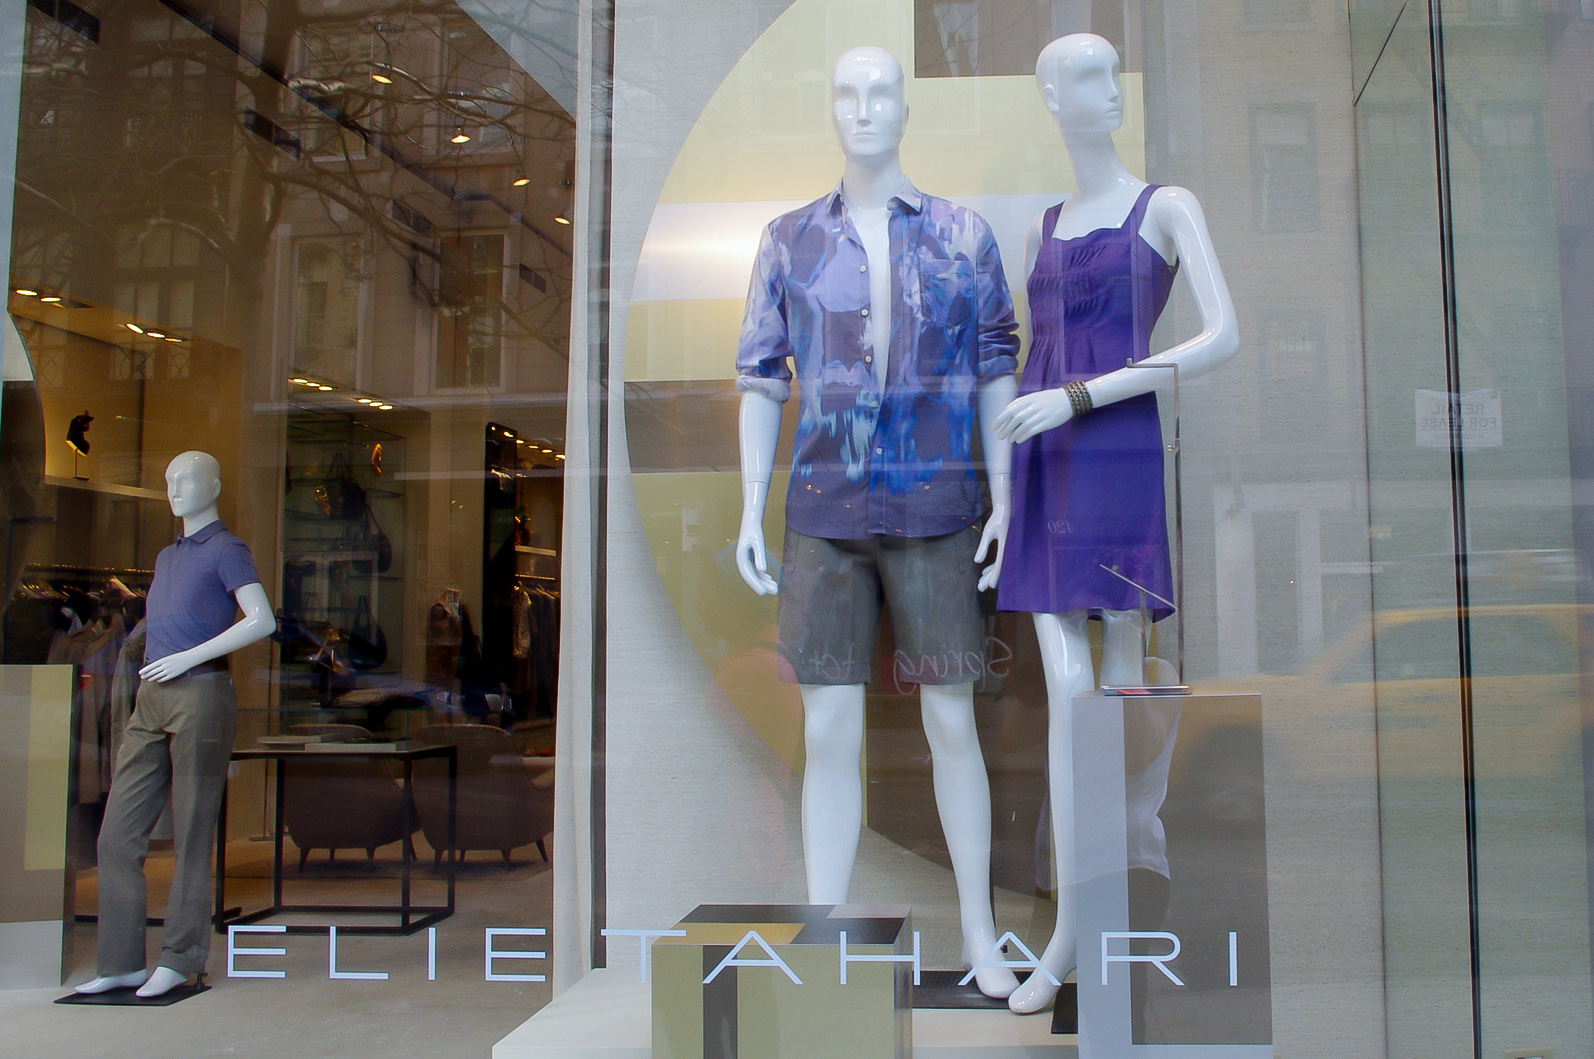 Fashion at Elie Tahari in New York. Photo by alphacityguides.